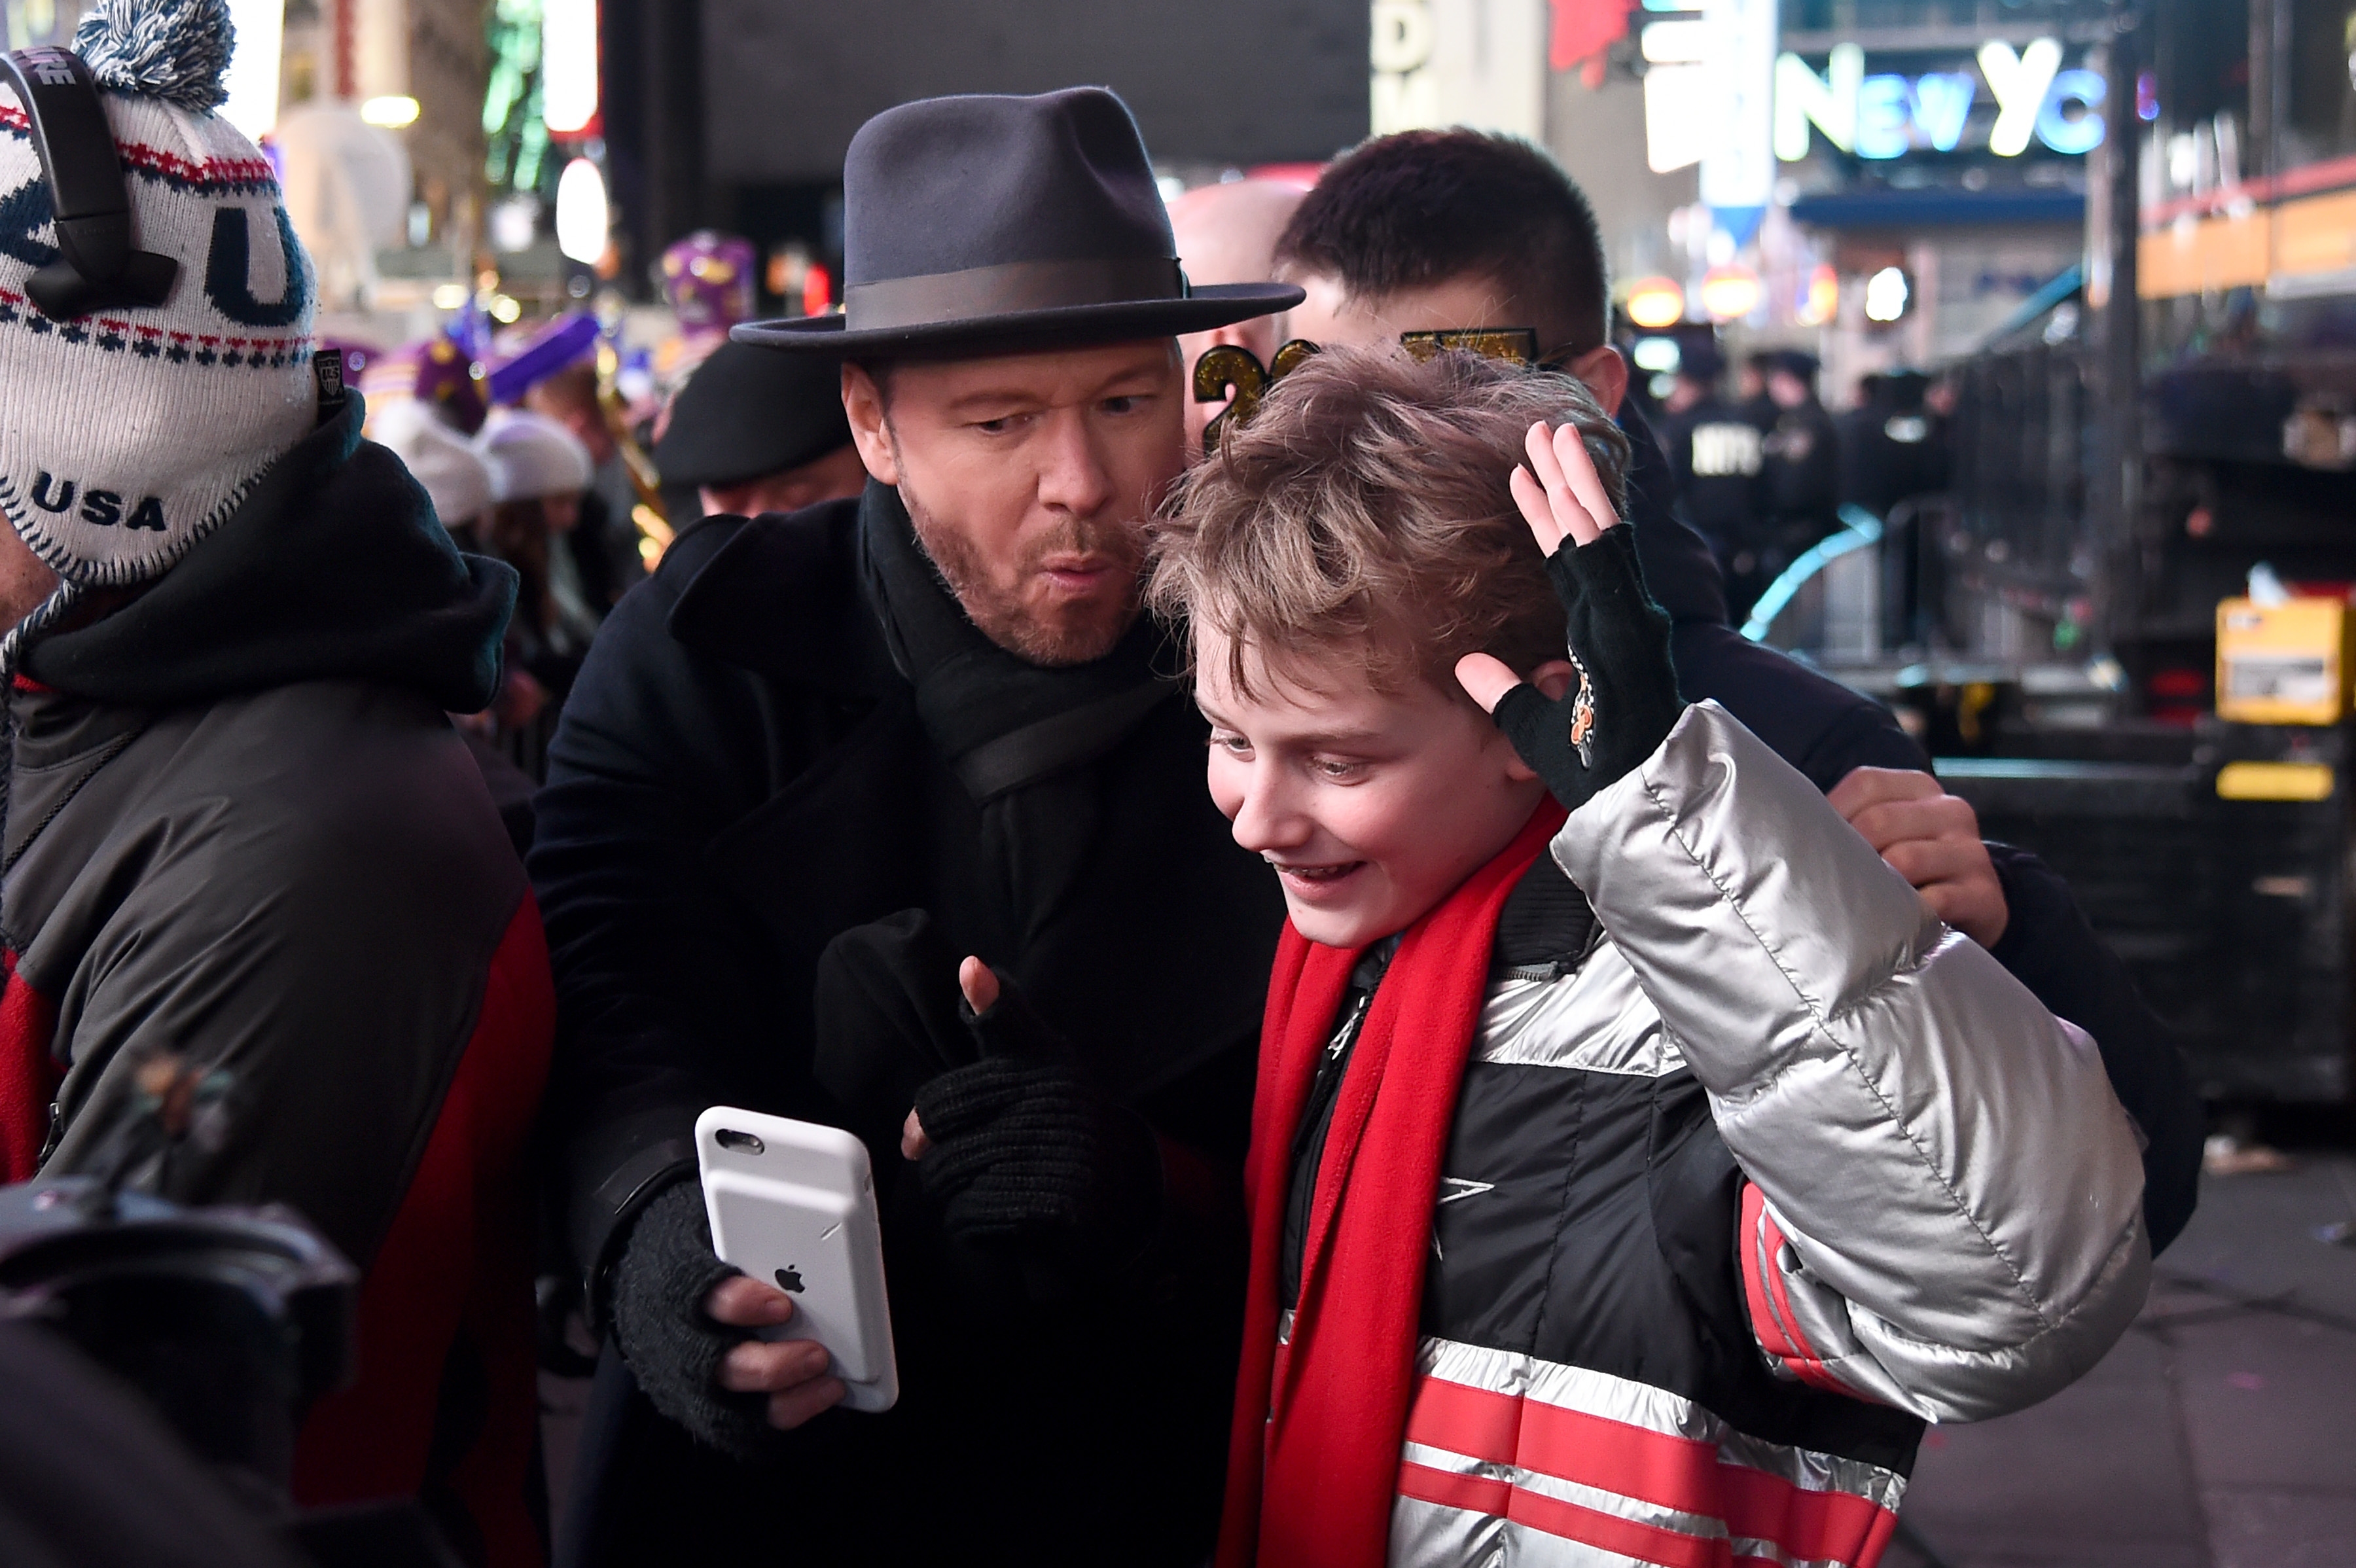 Donnie Wahlberg and Evan Asher at Dick Clark's New Year's Rockin' Eve in New York City, 2016 | Source: Getty Images